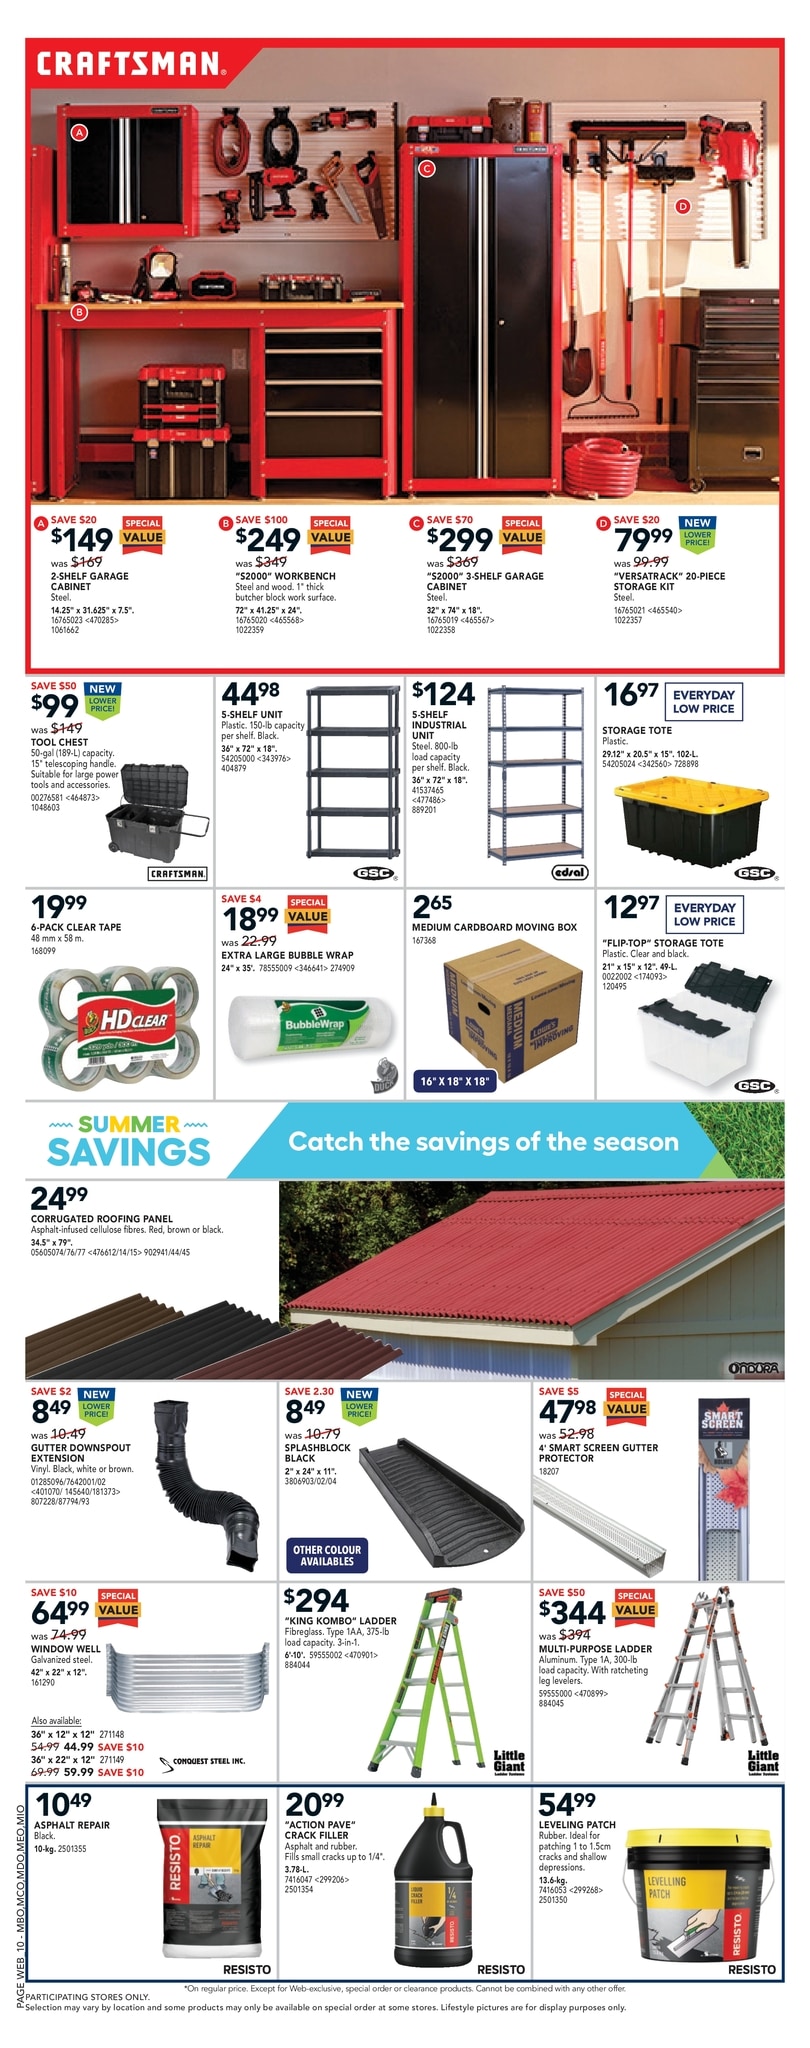 LOWE'S - Weekly Flyer Specials - Page 11